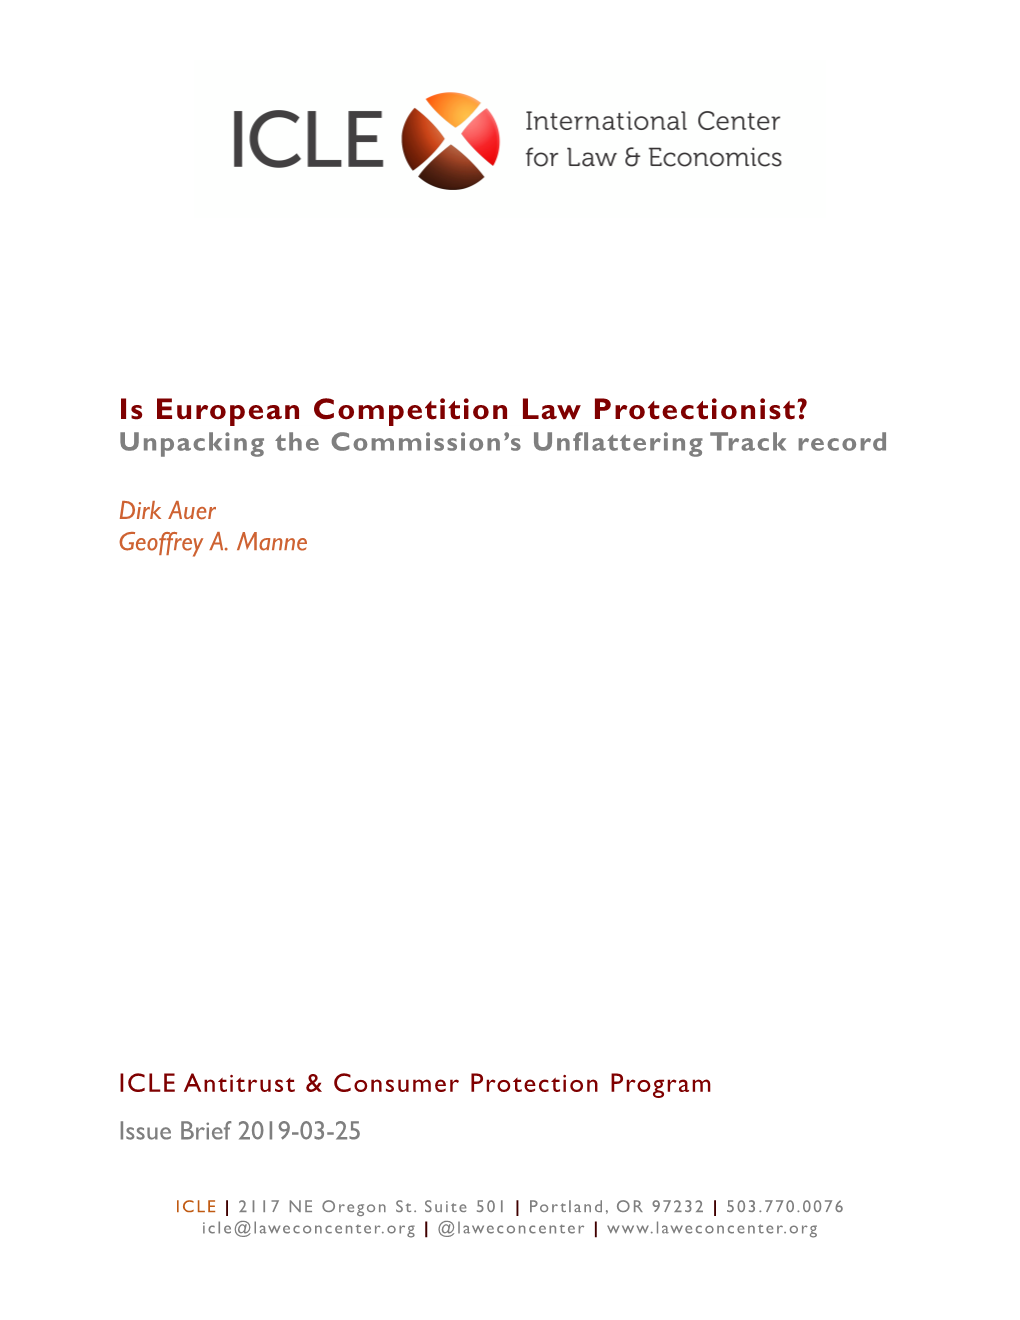 Is European Competition Law Protectionist? Unpacking the Commission’S Unflattering Track Record